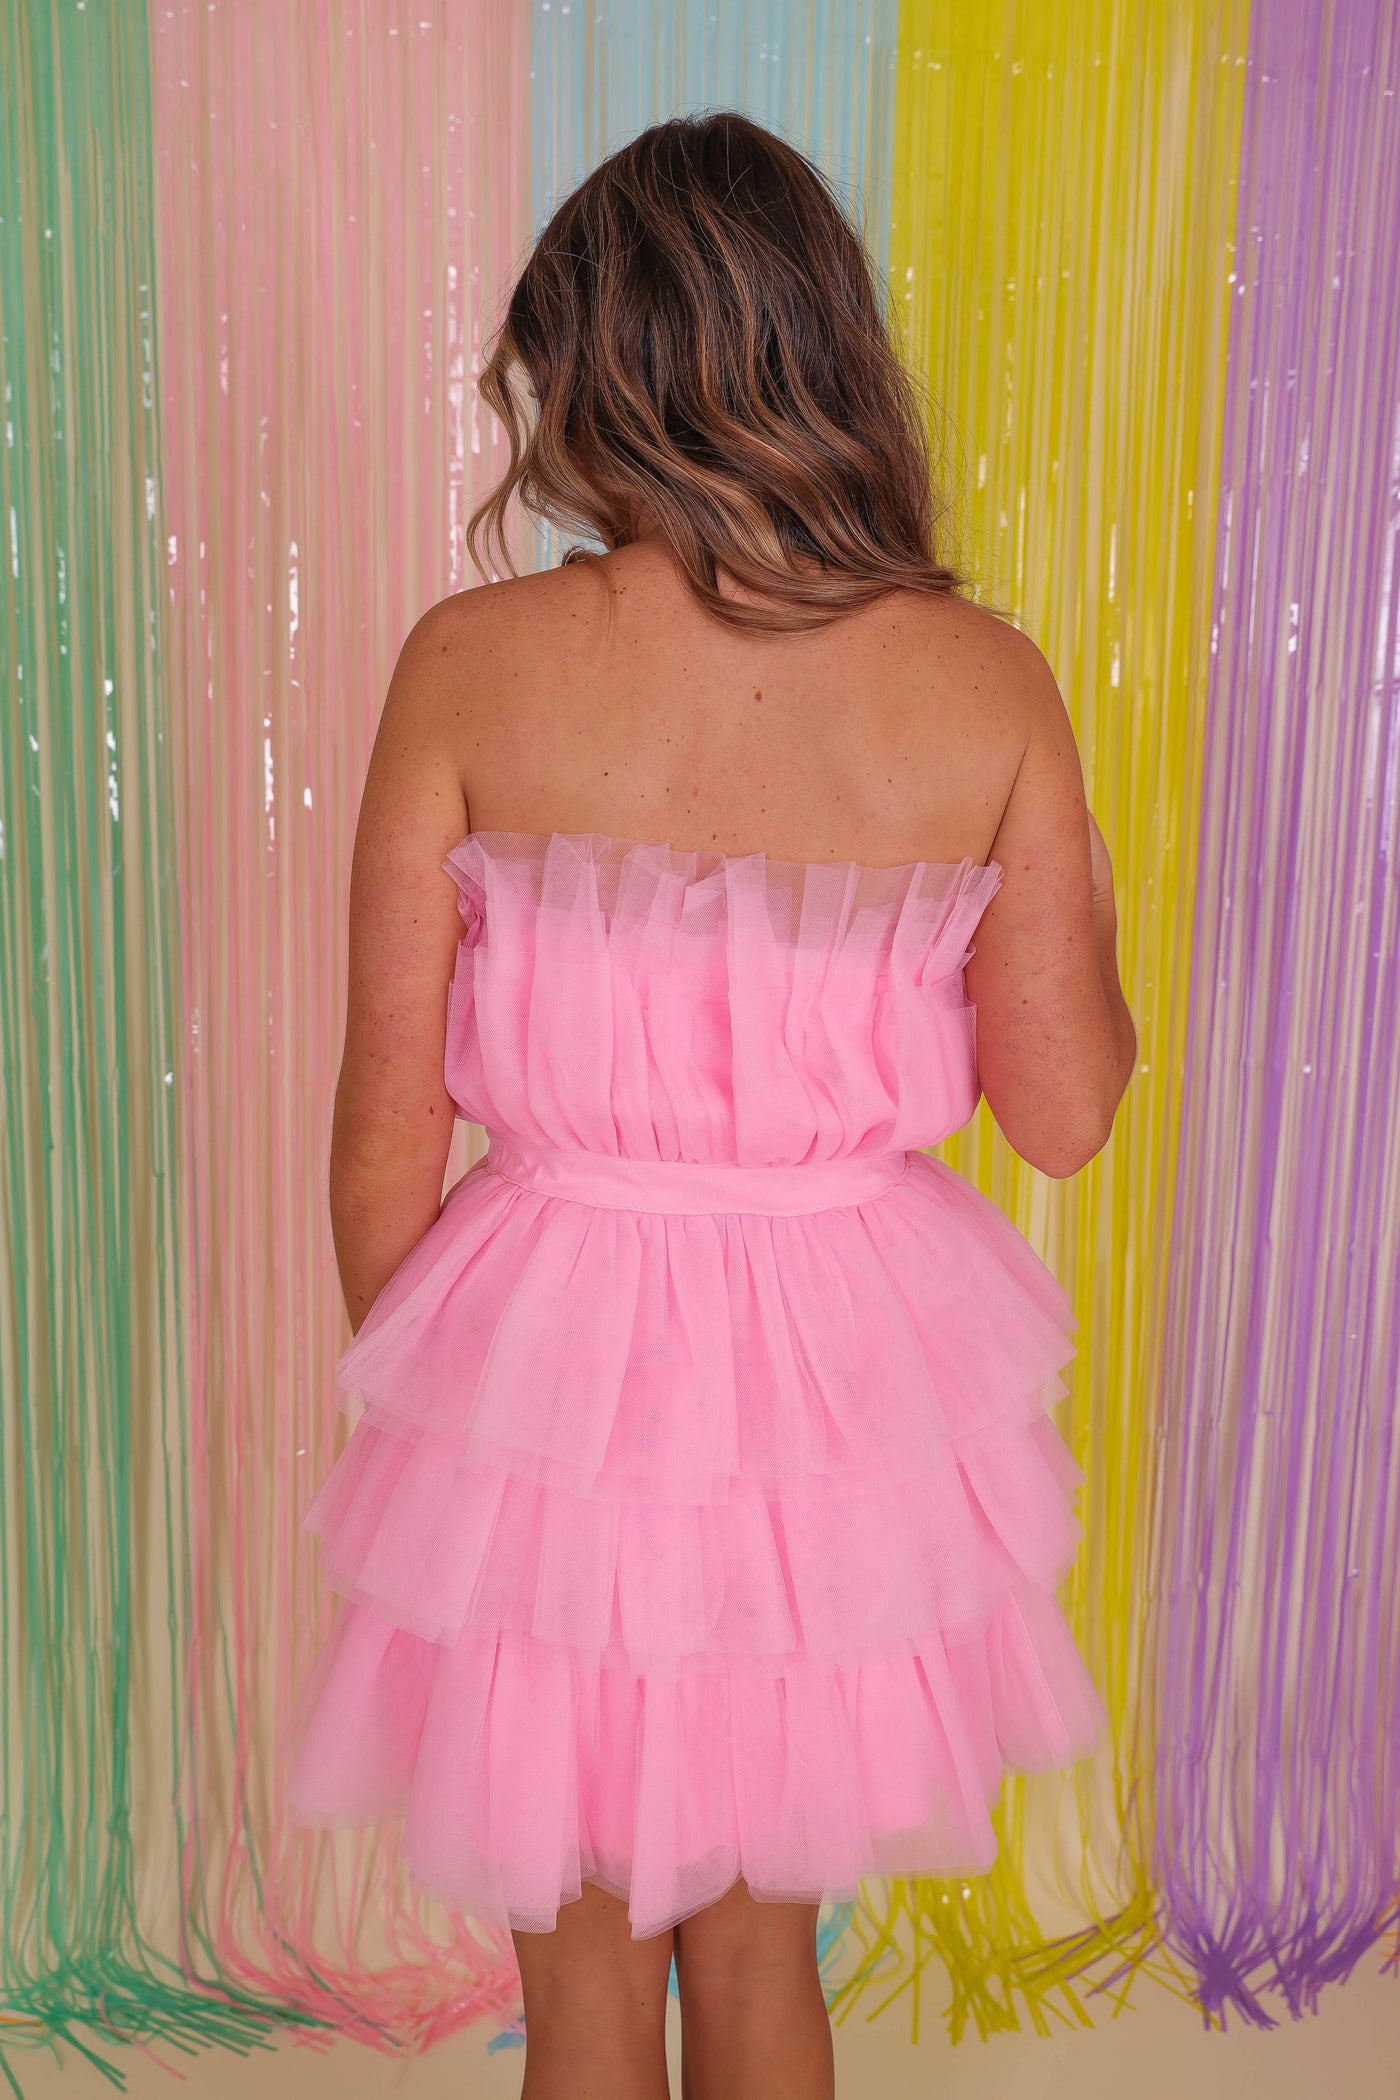 Blush Pink Tulle Dress- Women's Layered Pink Tulle Dress- Entro Dresses